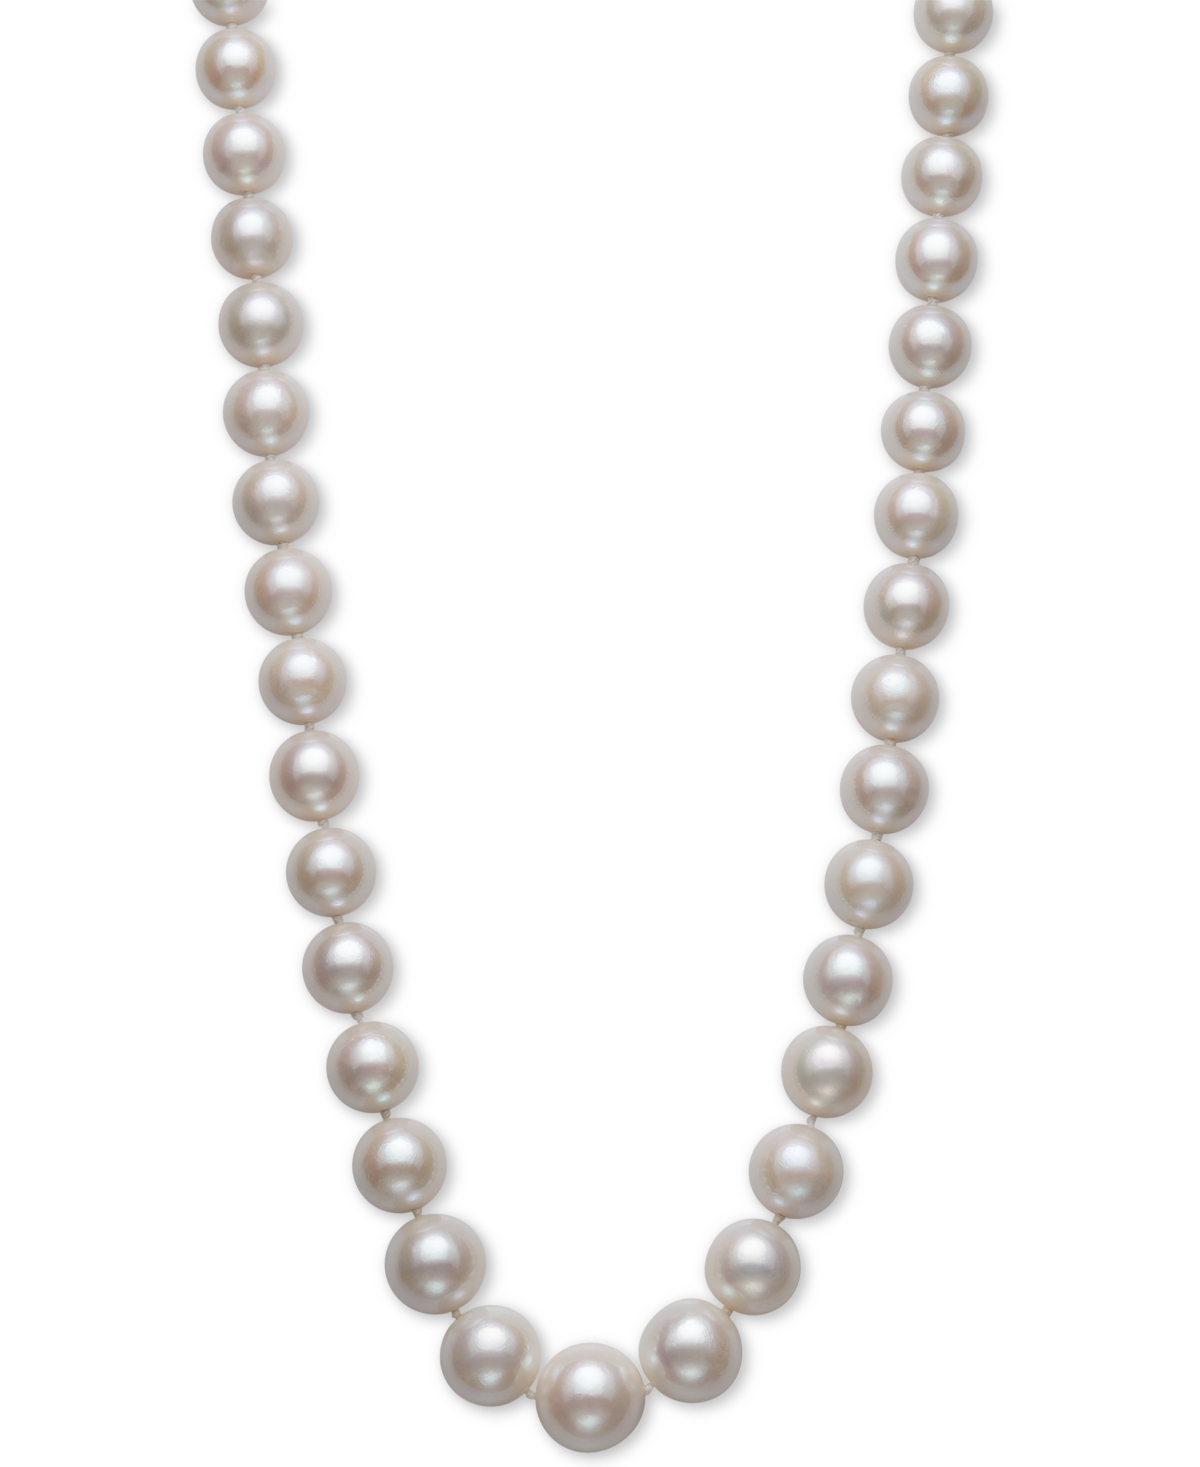 Cultured Freshwater Pearl Graduated 17-1/2" Strand Necklace (11-14mm) in 14k Gold, Created for Macy's - White